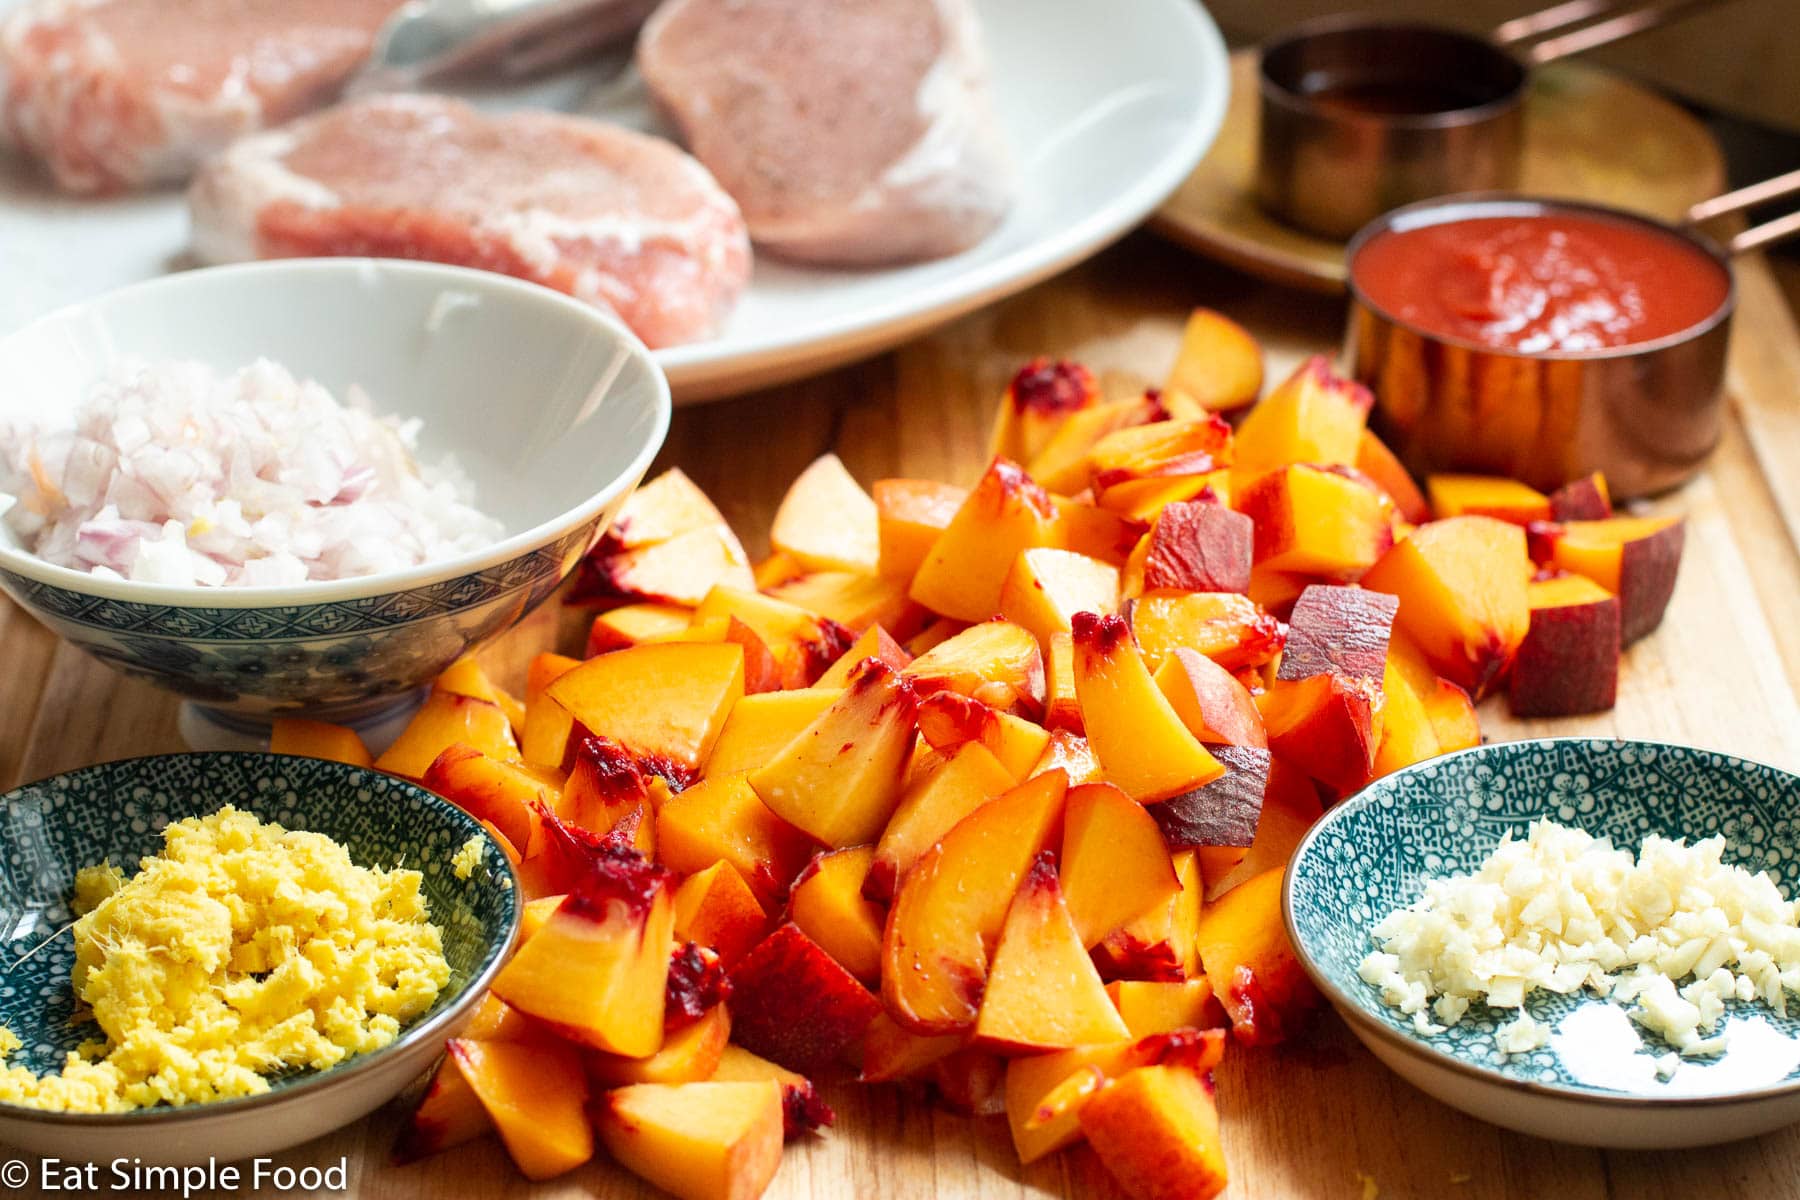 Diced fresh peaches on a wood cutting board with other ingredients: diced garlic, minced ginger, diced shallots, tomato sauce, and 3 raw pork chops in background on a white plate.